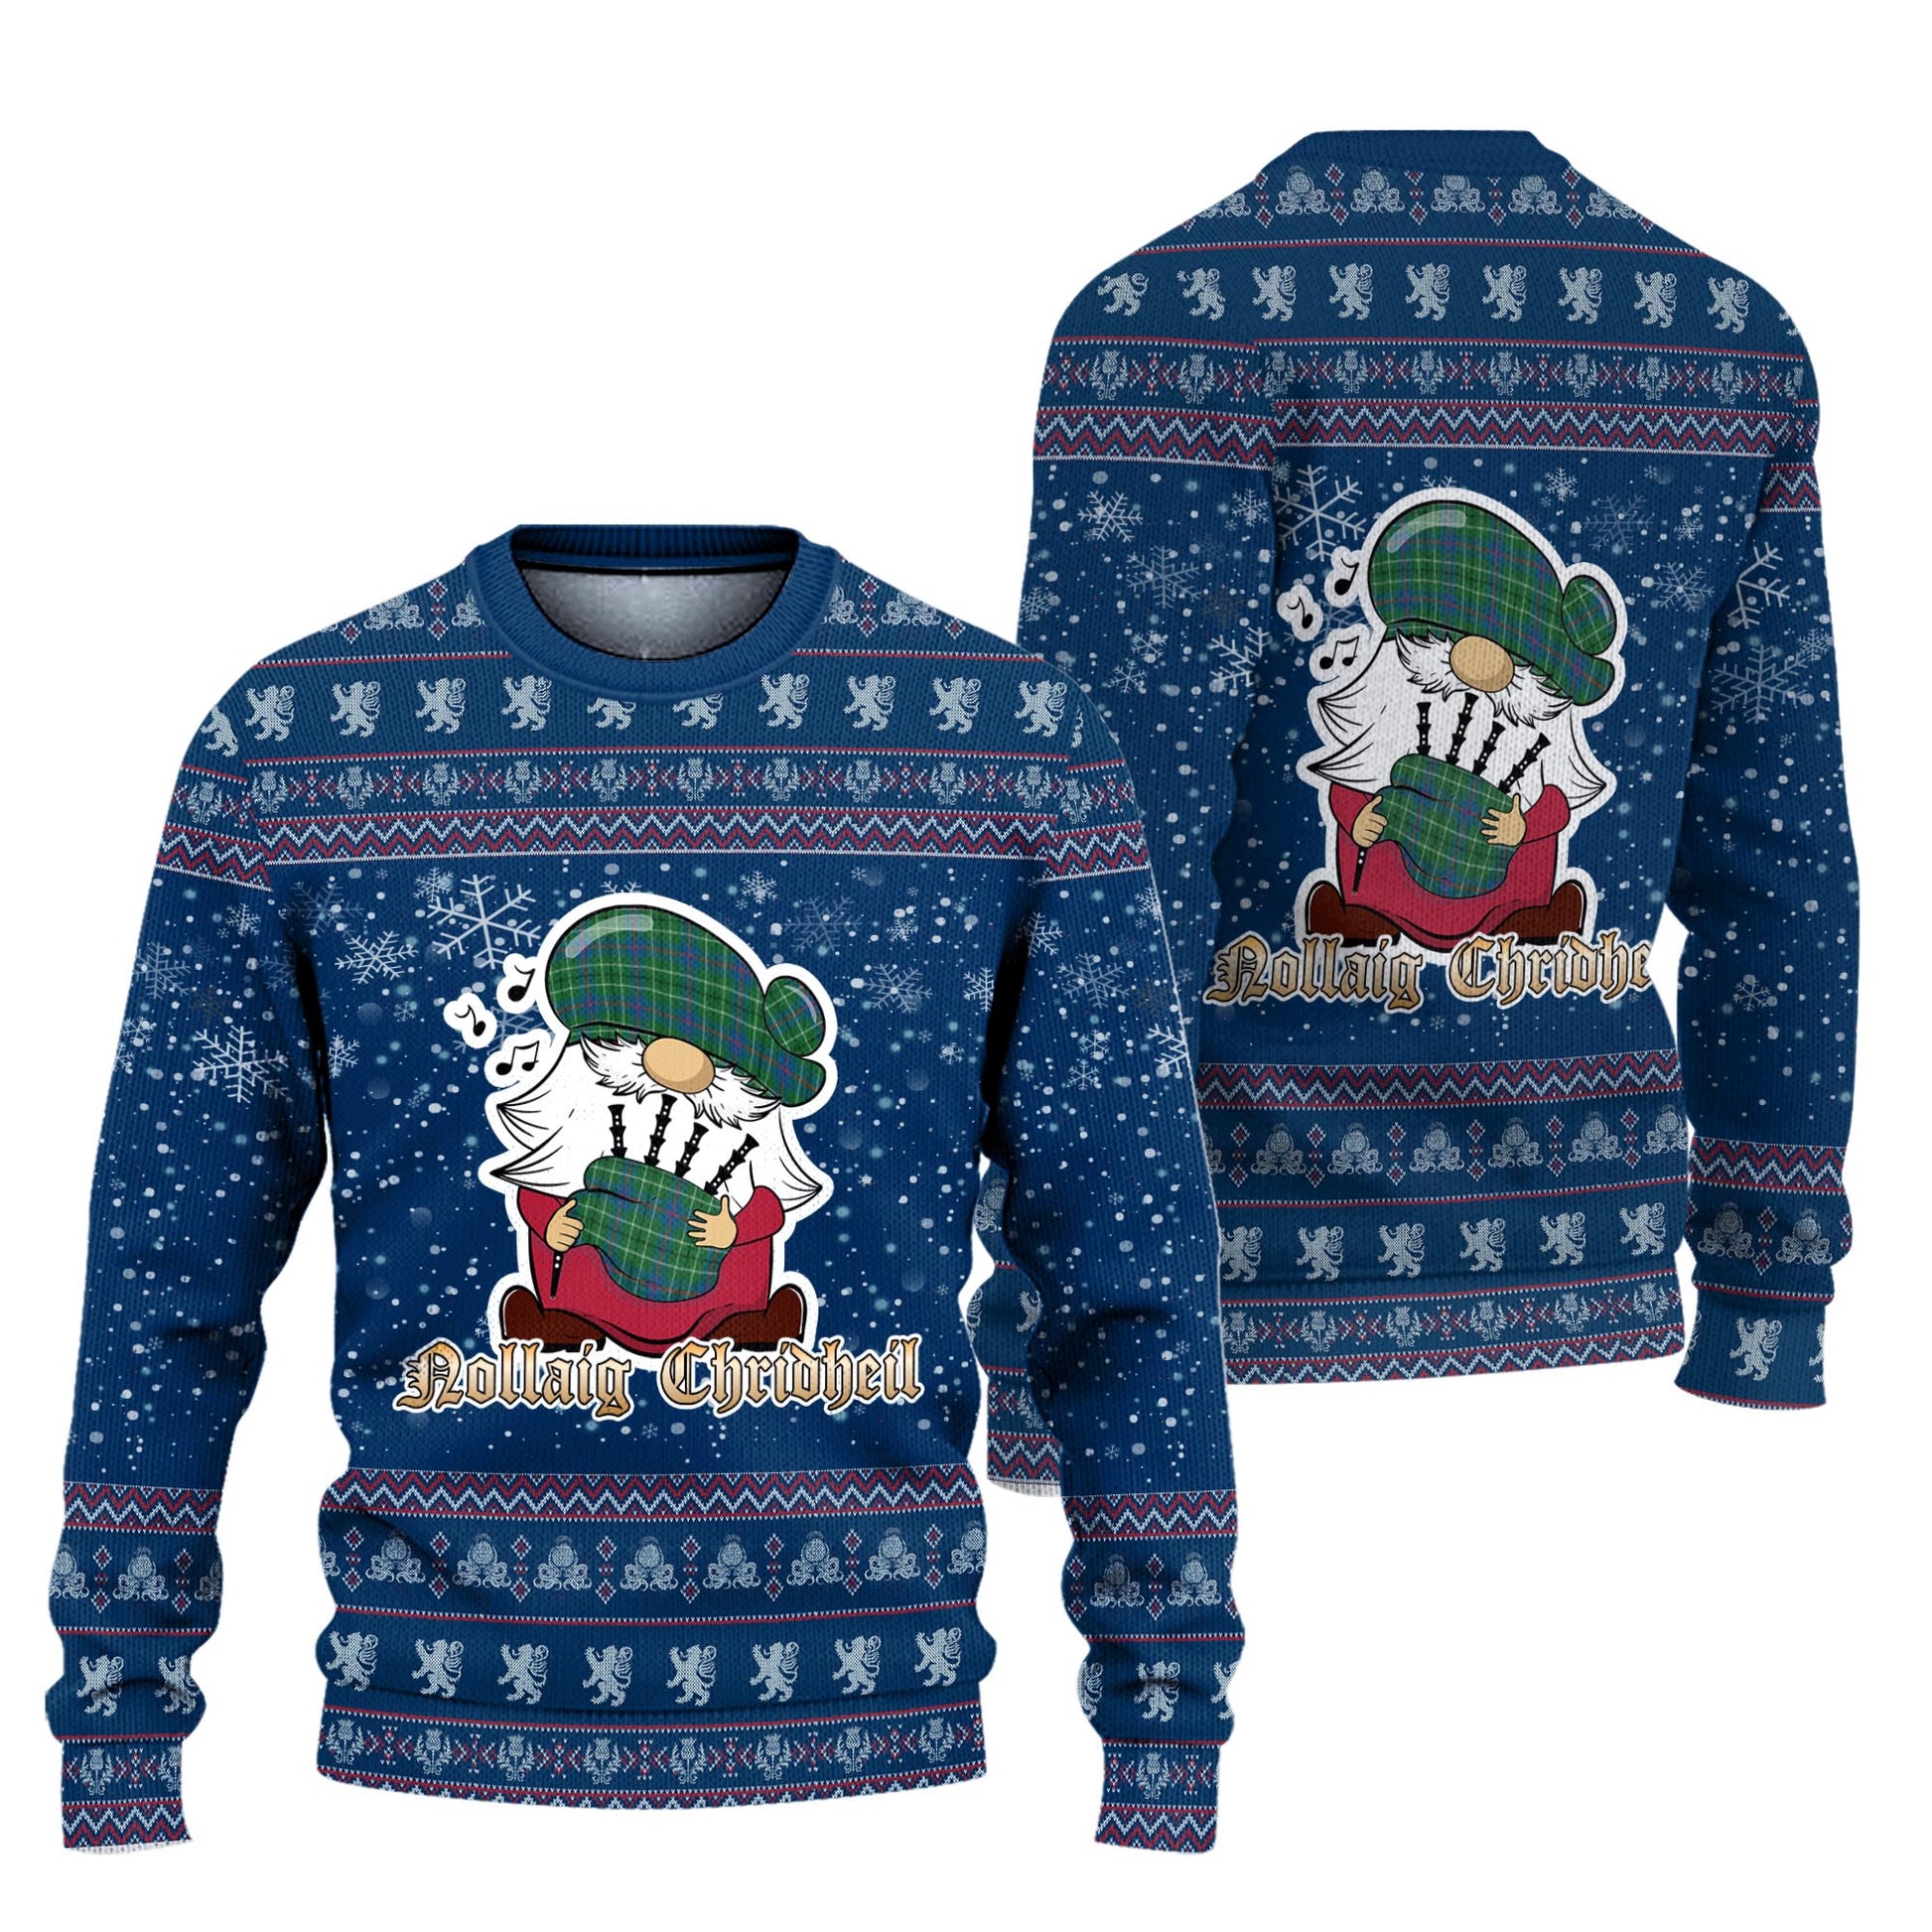 Duncan Ancient Clan Christmas Family Knitted Sweater with Funny Gnome Playing Bagpipes Unisex Blue - Tartanvibesclothing